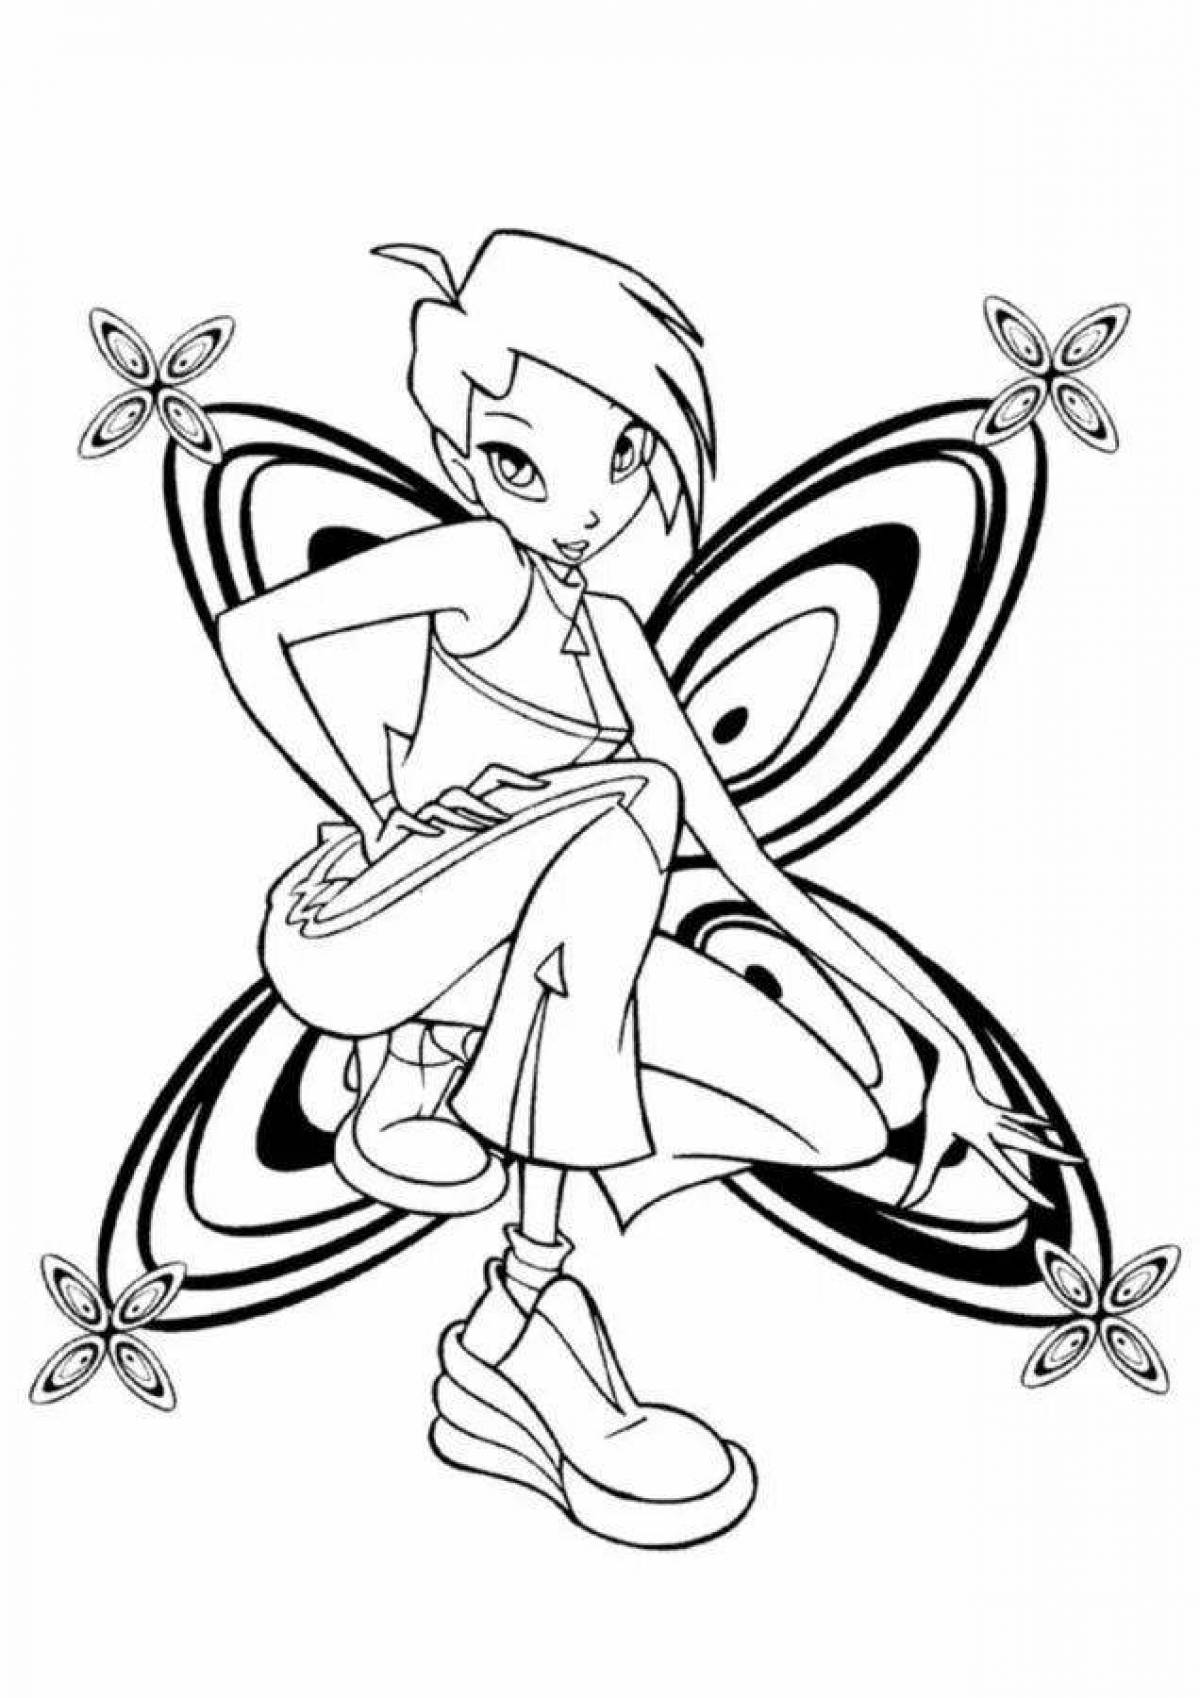 Winx inspirational coloring book for kids